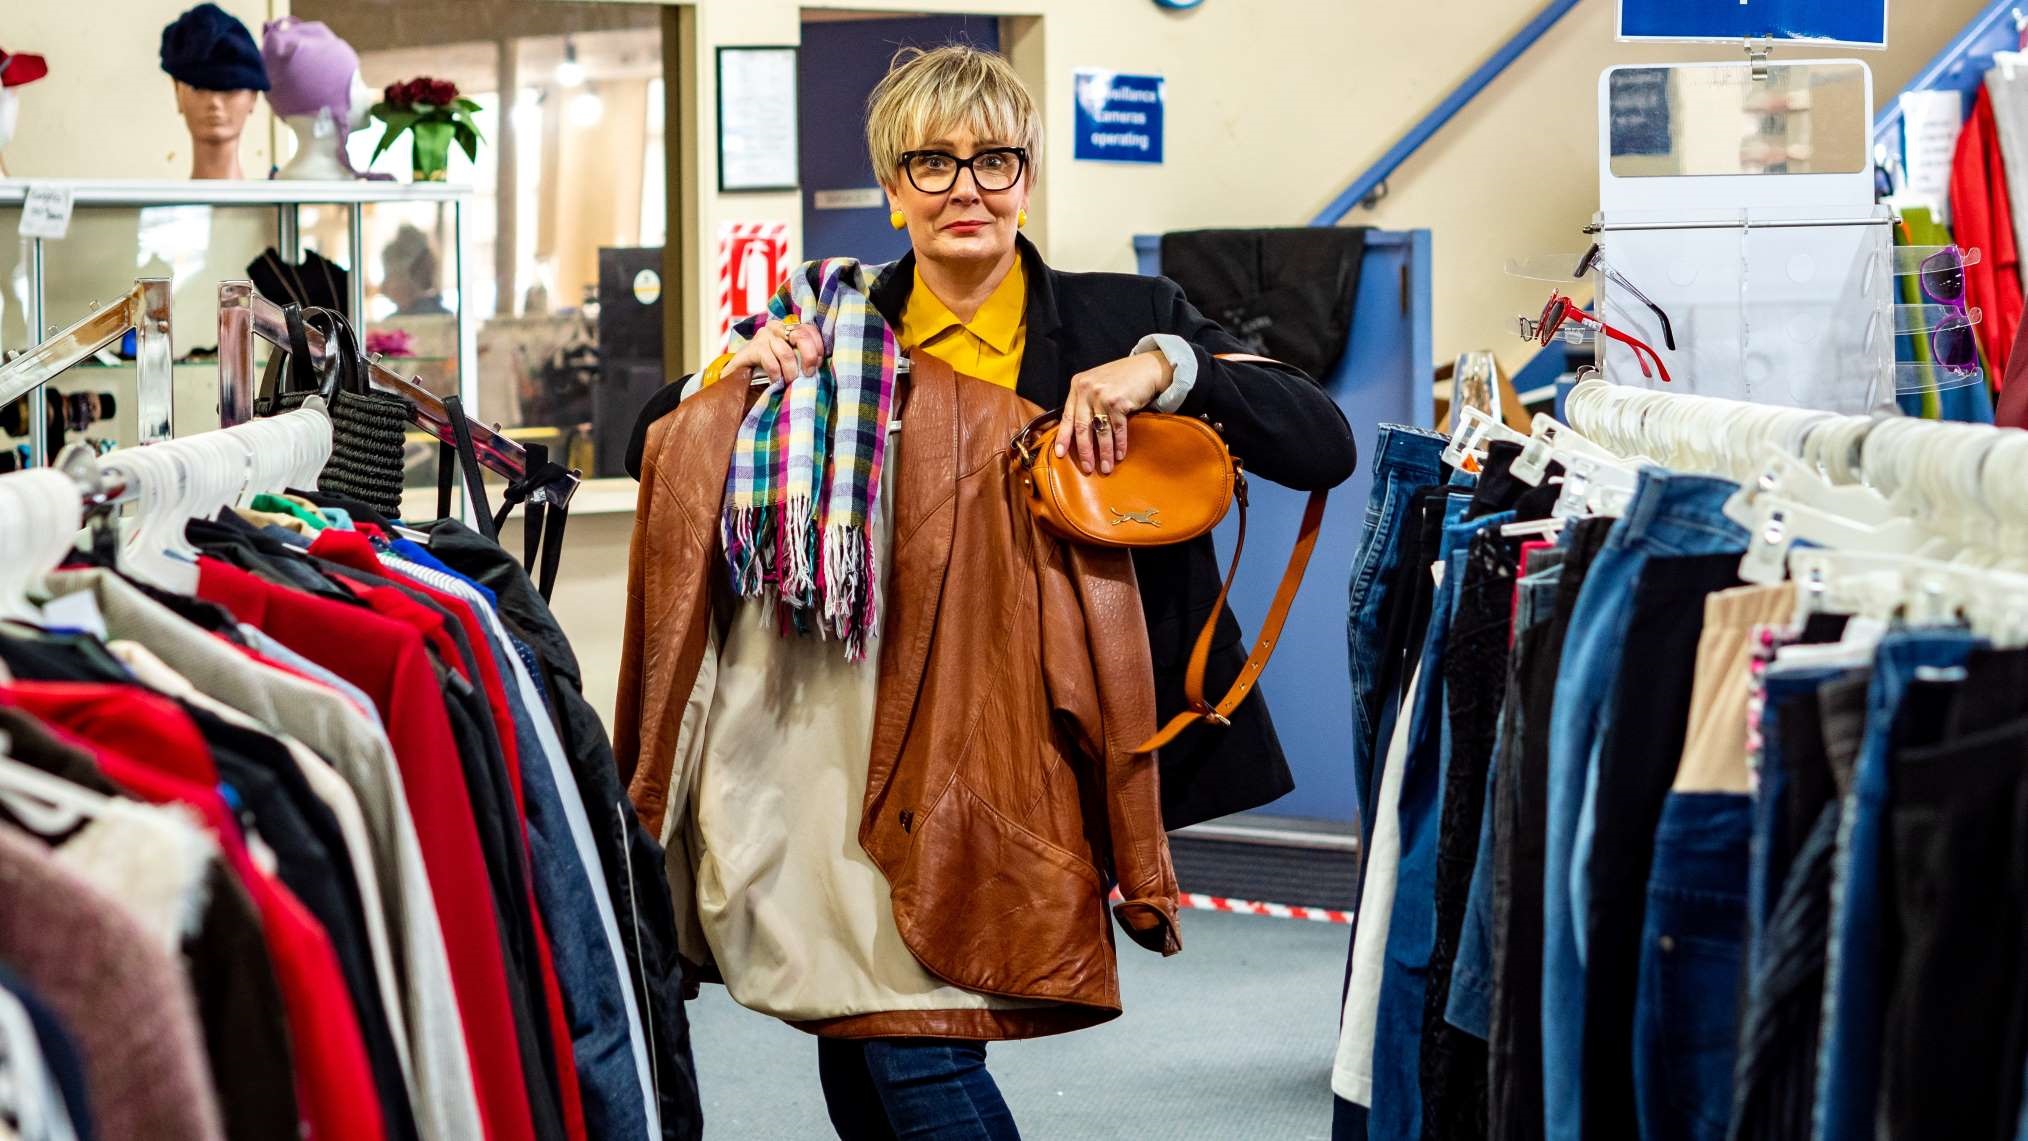 Photo shows stylish woman with bold spectacles standing in a clothing aisle at an op-shop, holding up an outfit she's pulled from the racks: leather jacket, scarf and bag.